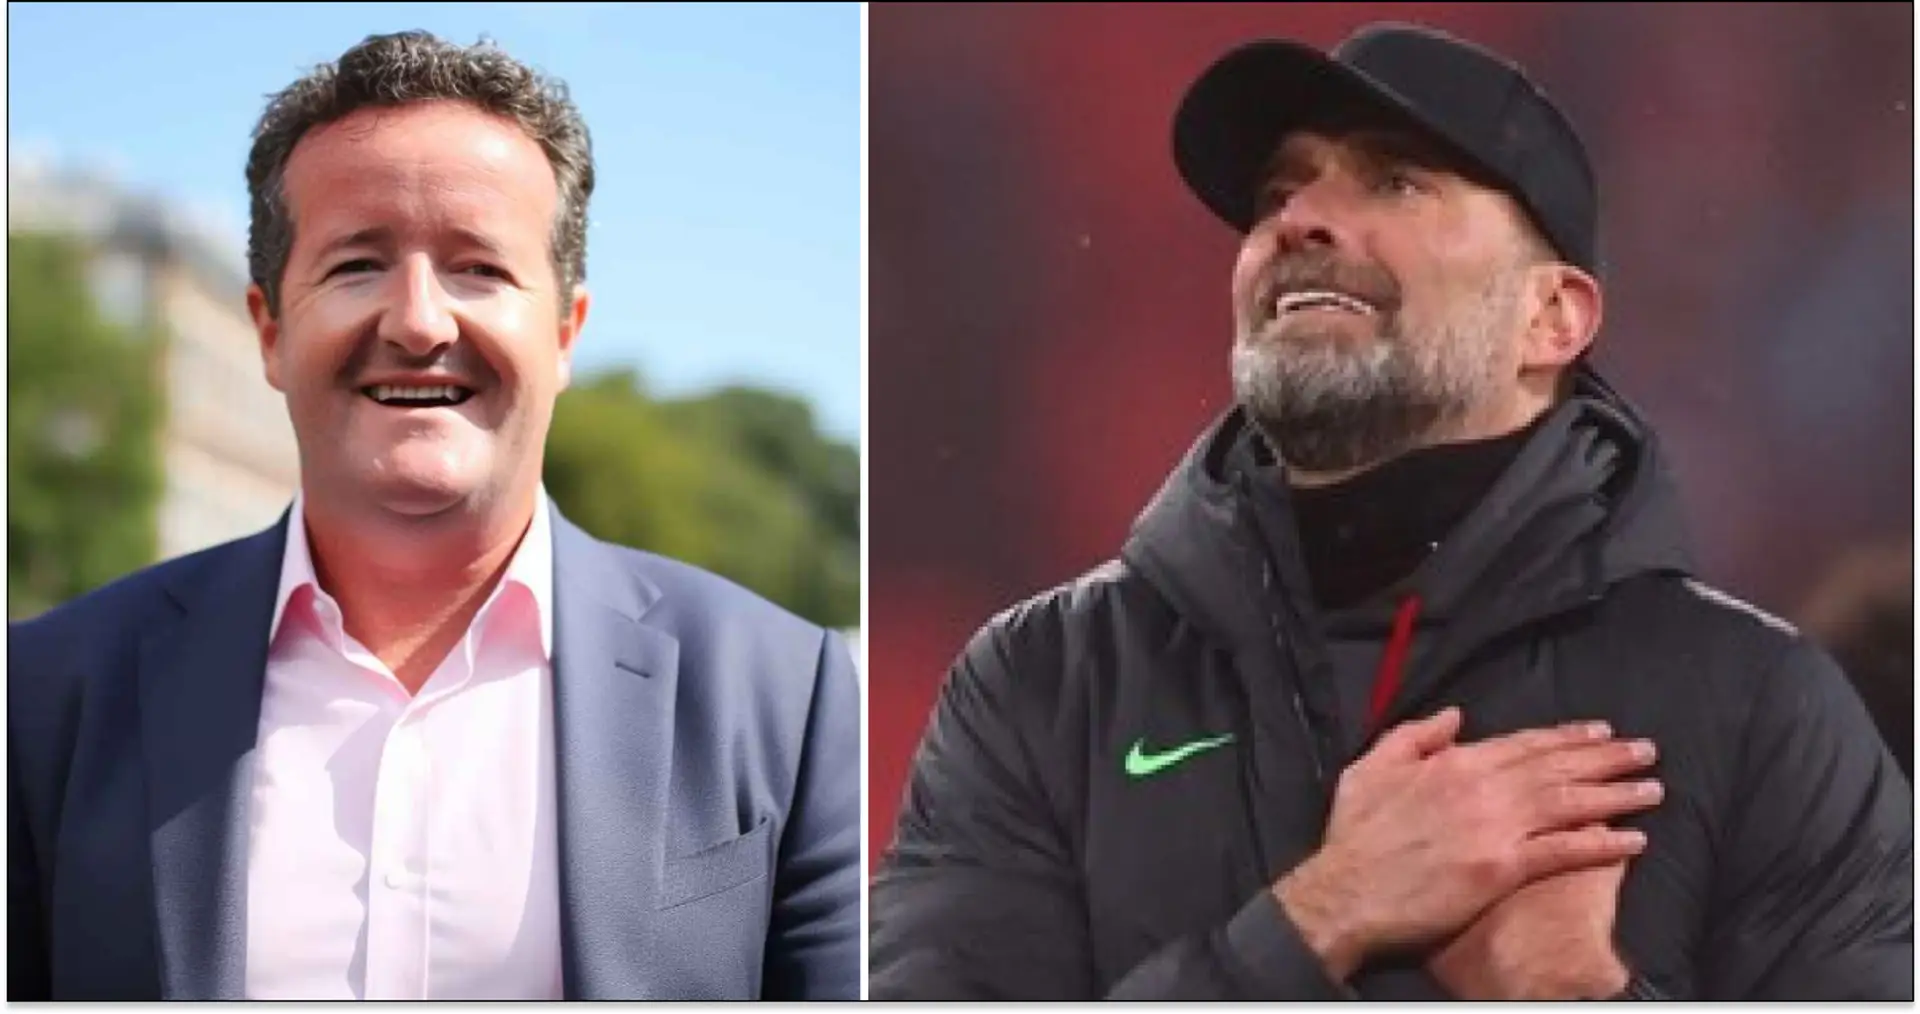 Piers Morgan: 'If winning Carabao Cup makes Klopp cry, it’s definitely time to move on'